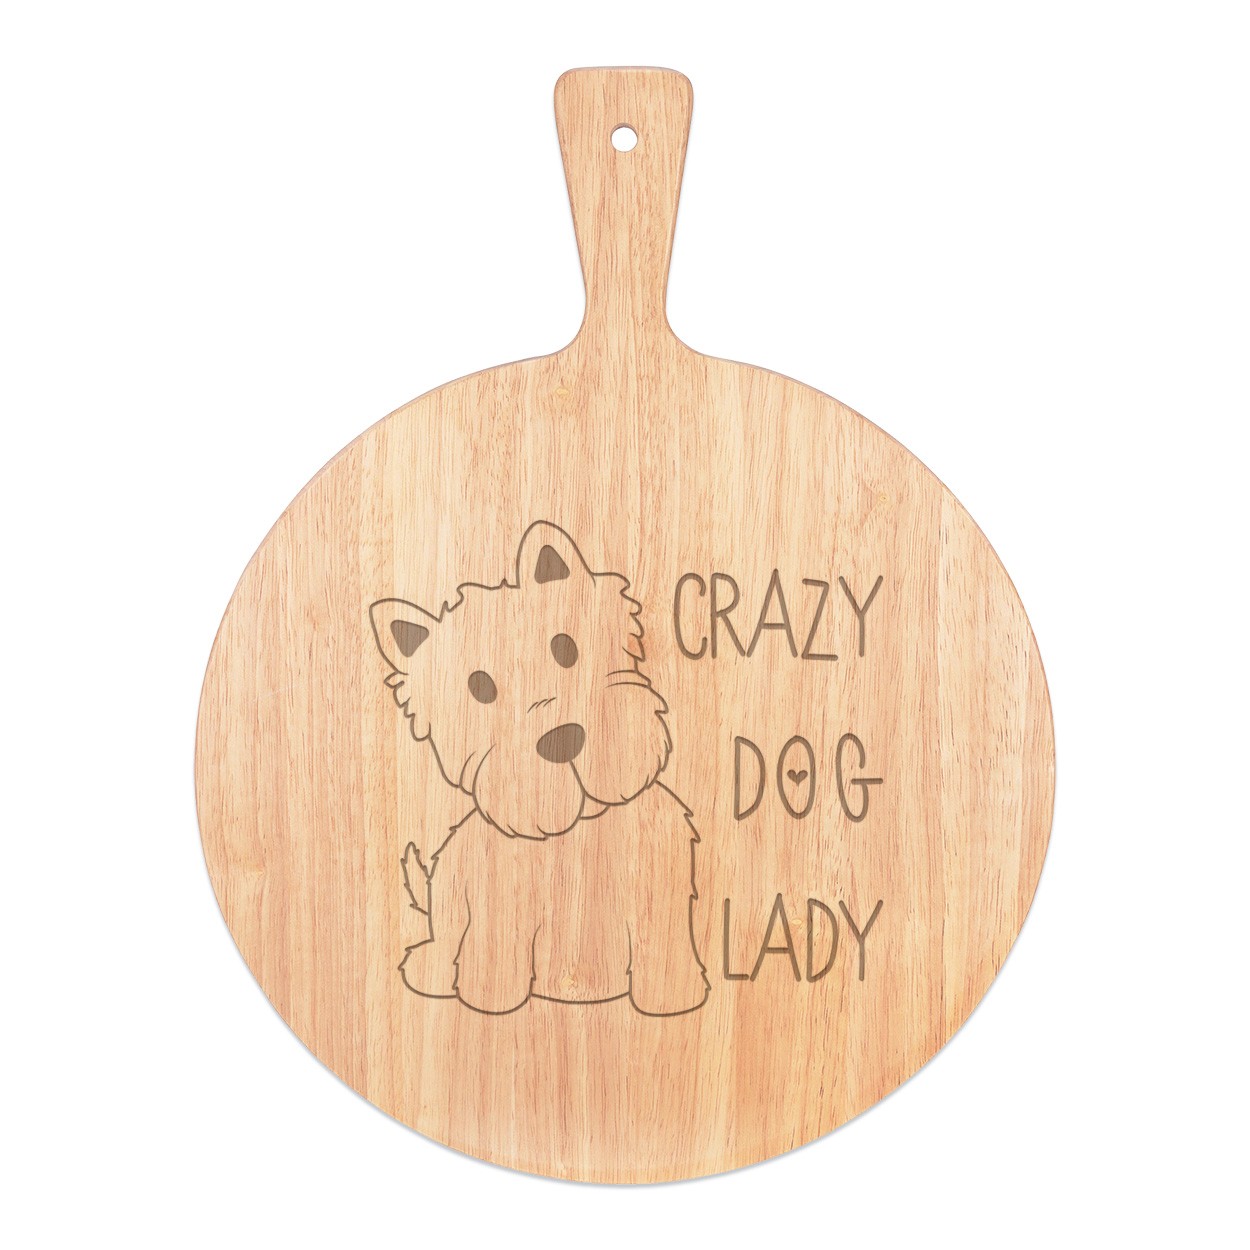 Crazy Dog Lady Pizza Board Paddle Serving Tray Handle Round Wooden 45x34cm